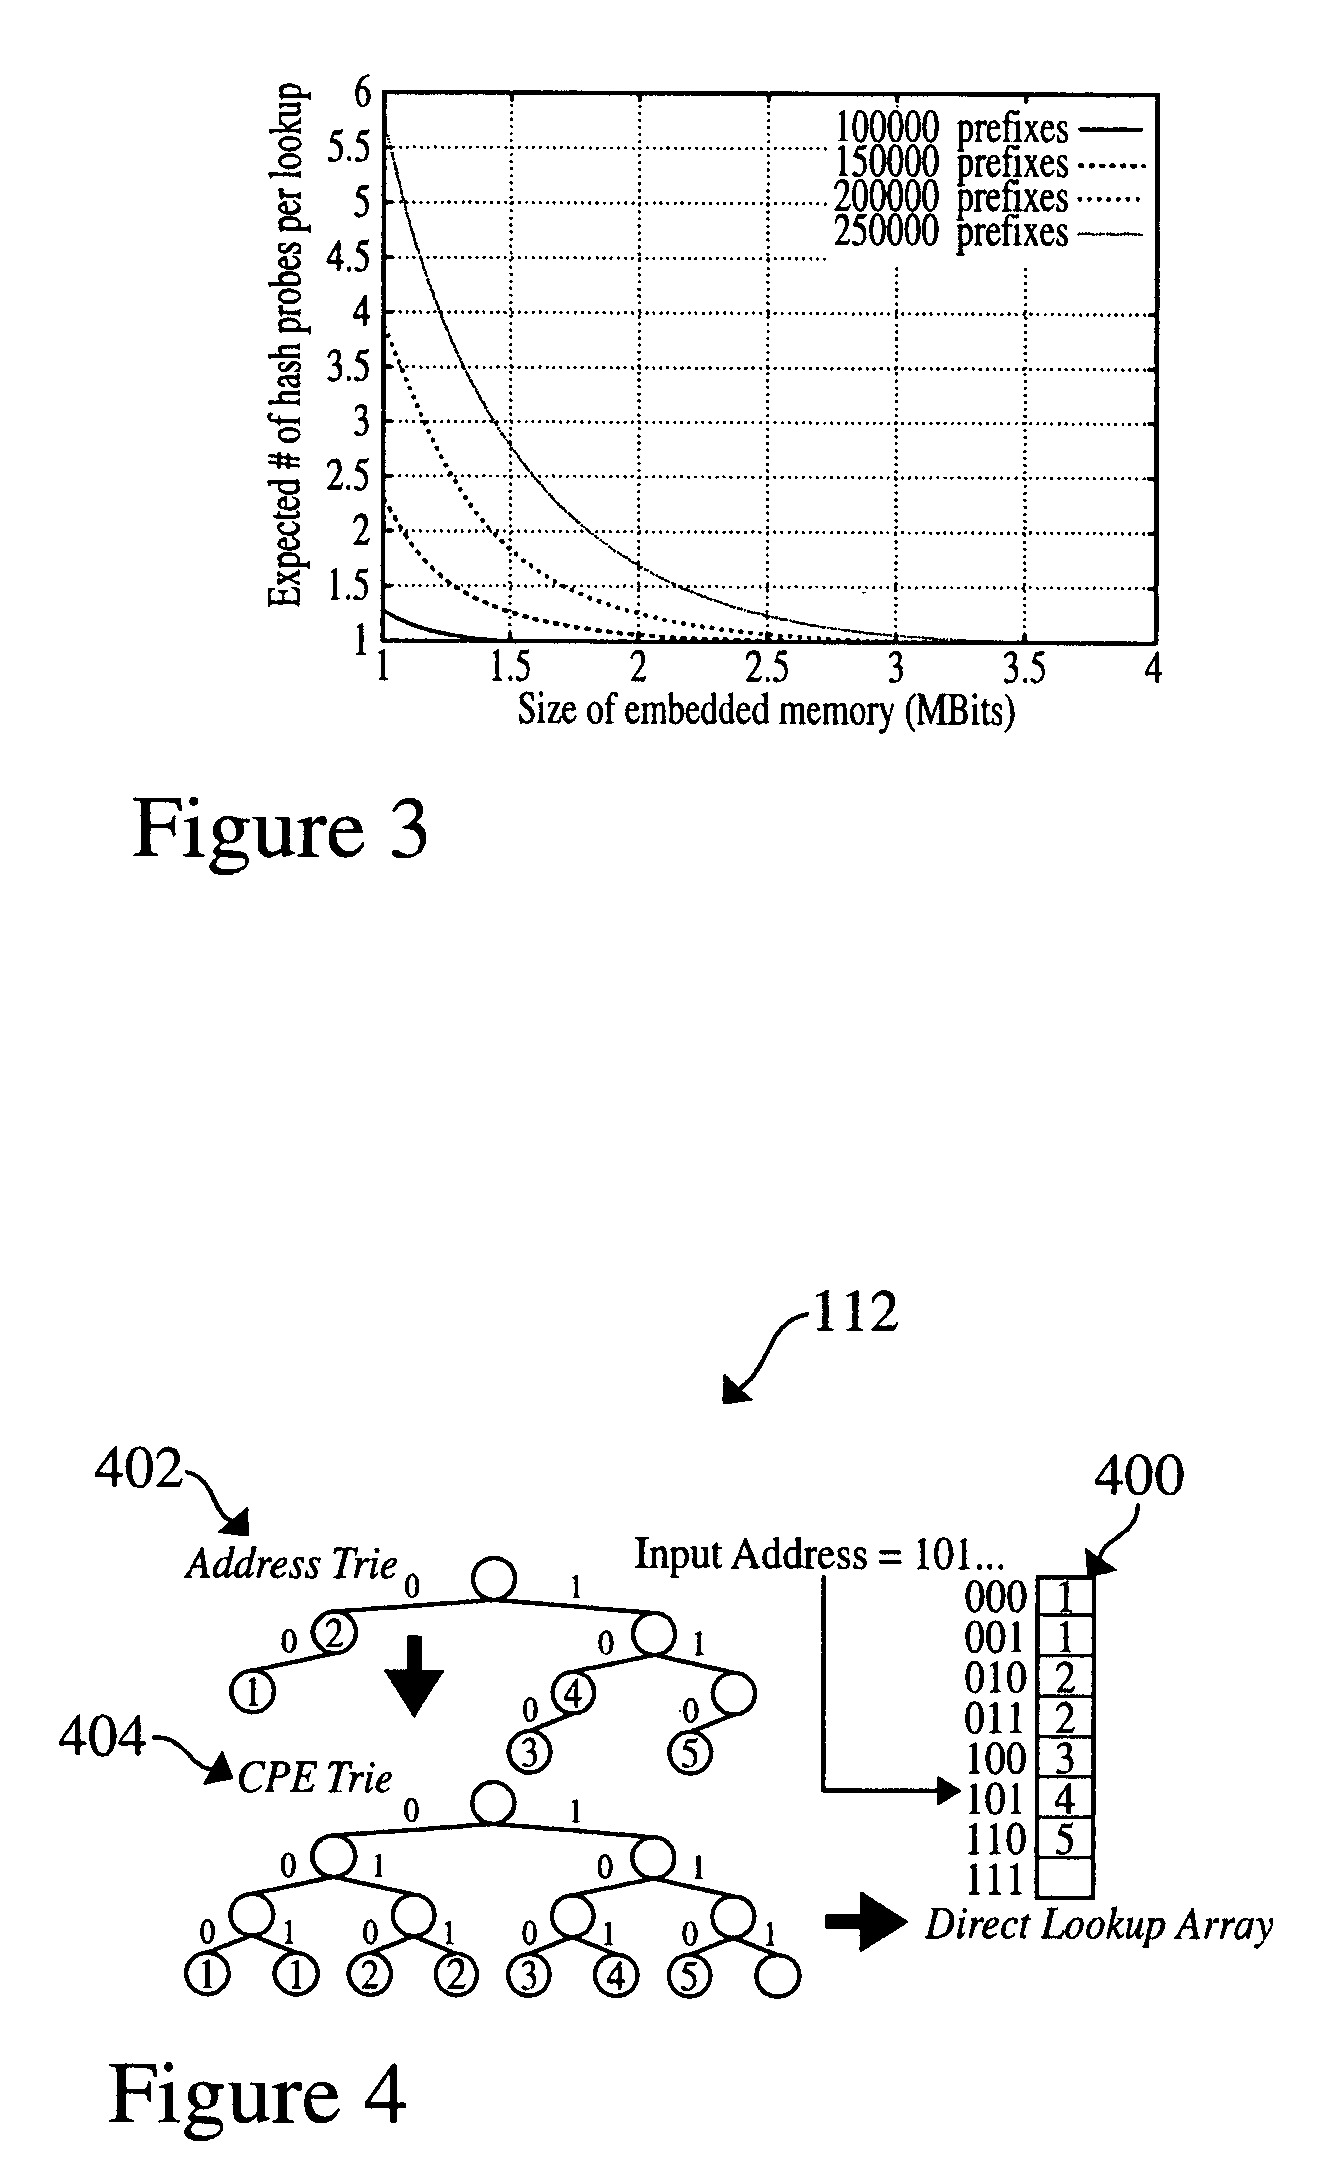 Method and system for performing longest prefix matching for network address lookup using bloom filters